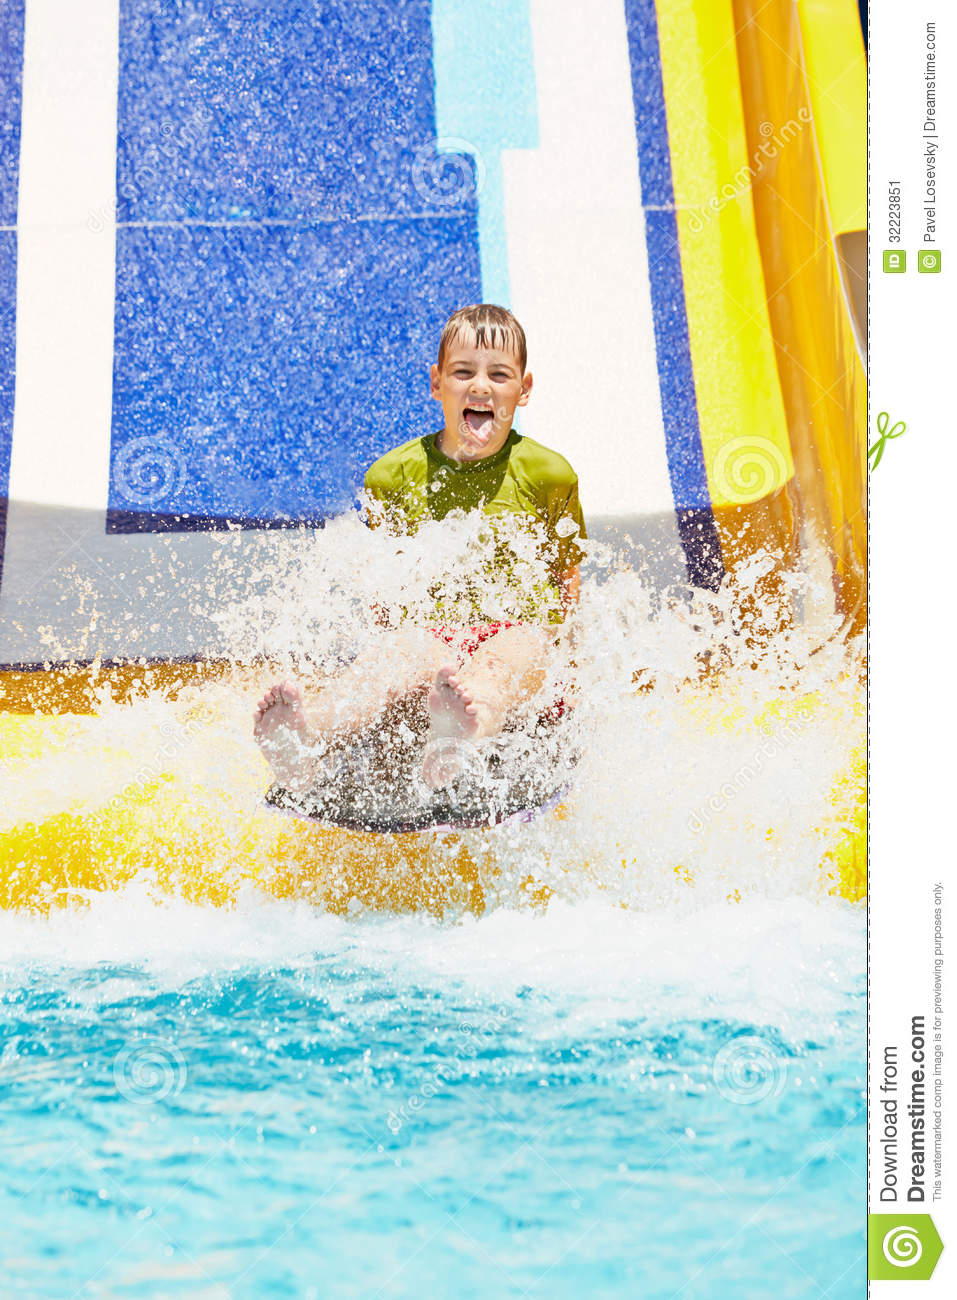 Boy Shouts While Slides Down Water Slide At Summer